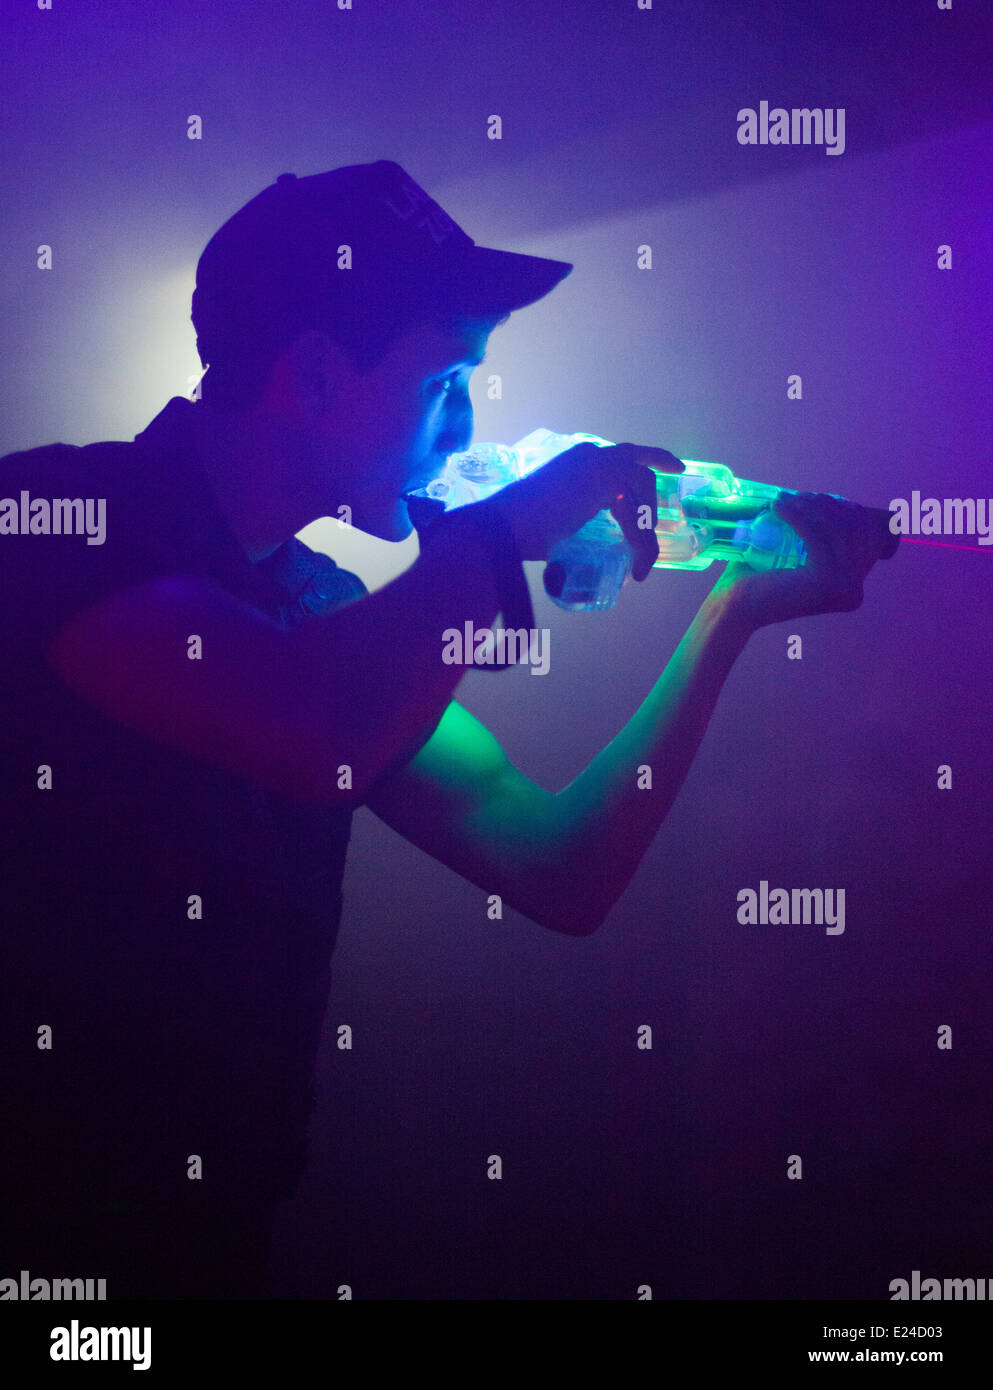 a male model playing a laser / lazer gun war game in a special darkened arena under UV lighting with light beams Stock Photo